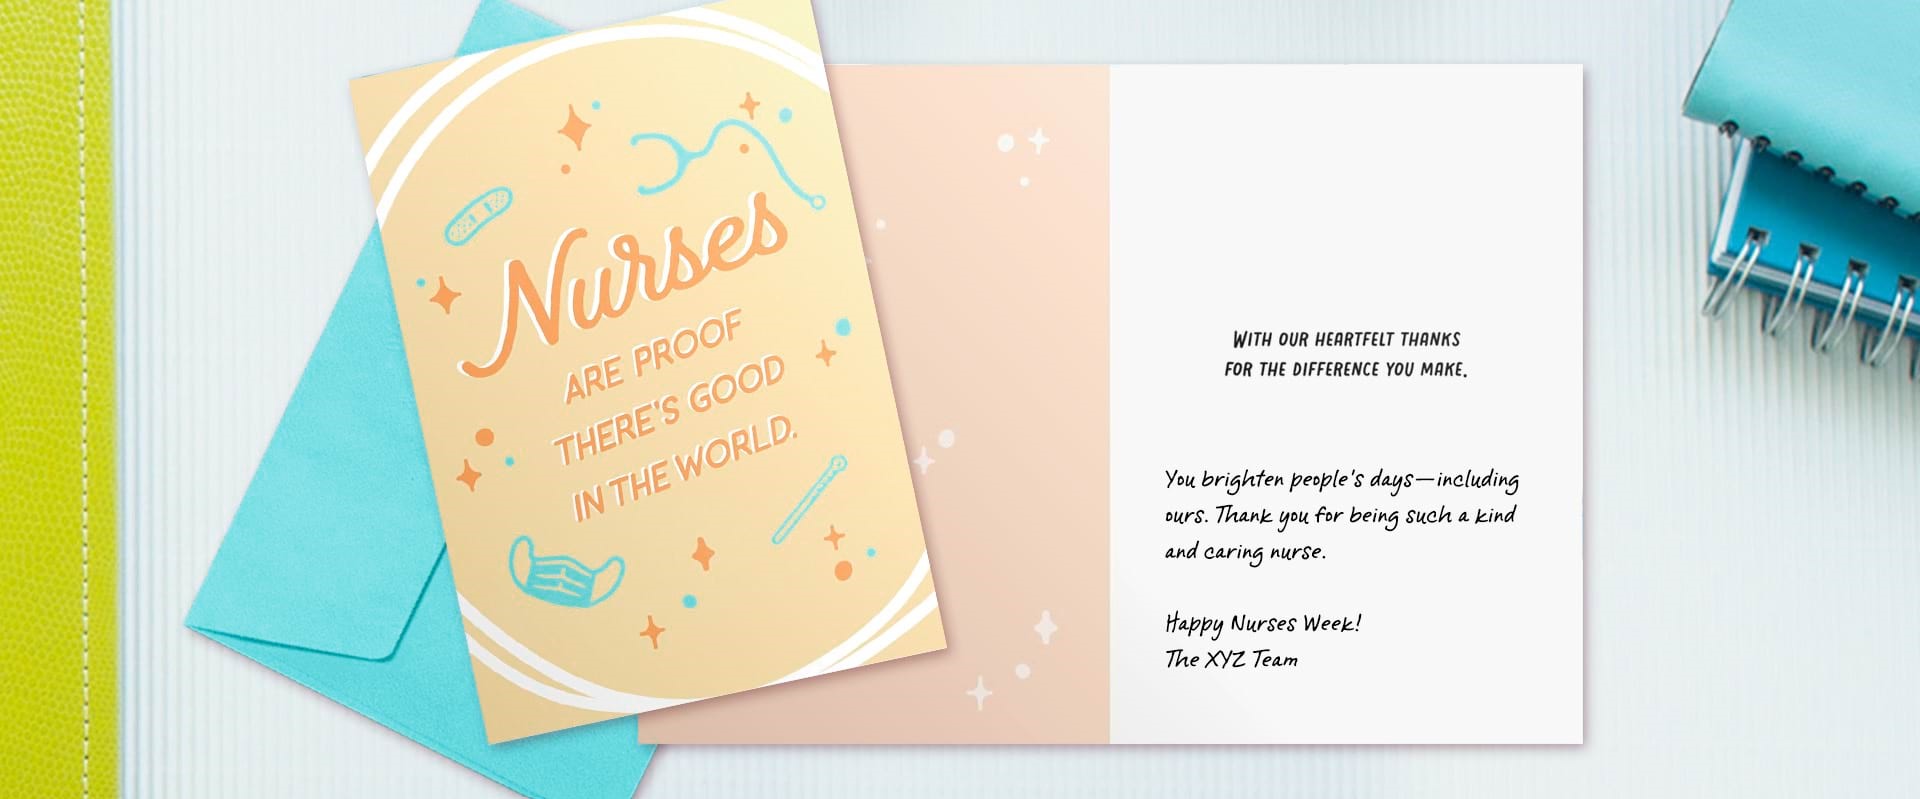 Nurse Card Product with Sentiment Hero Image